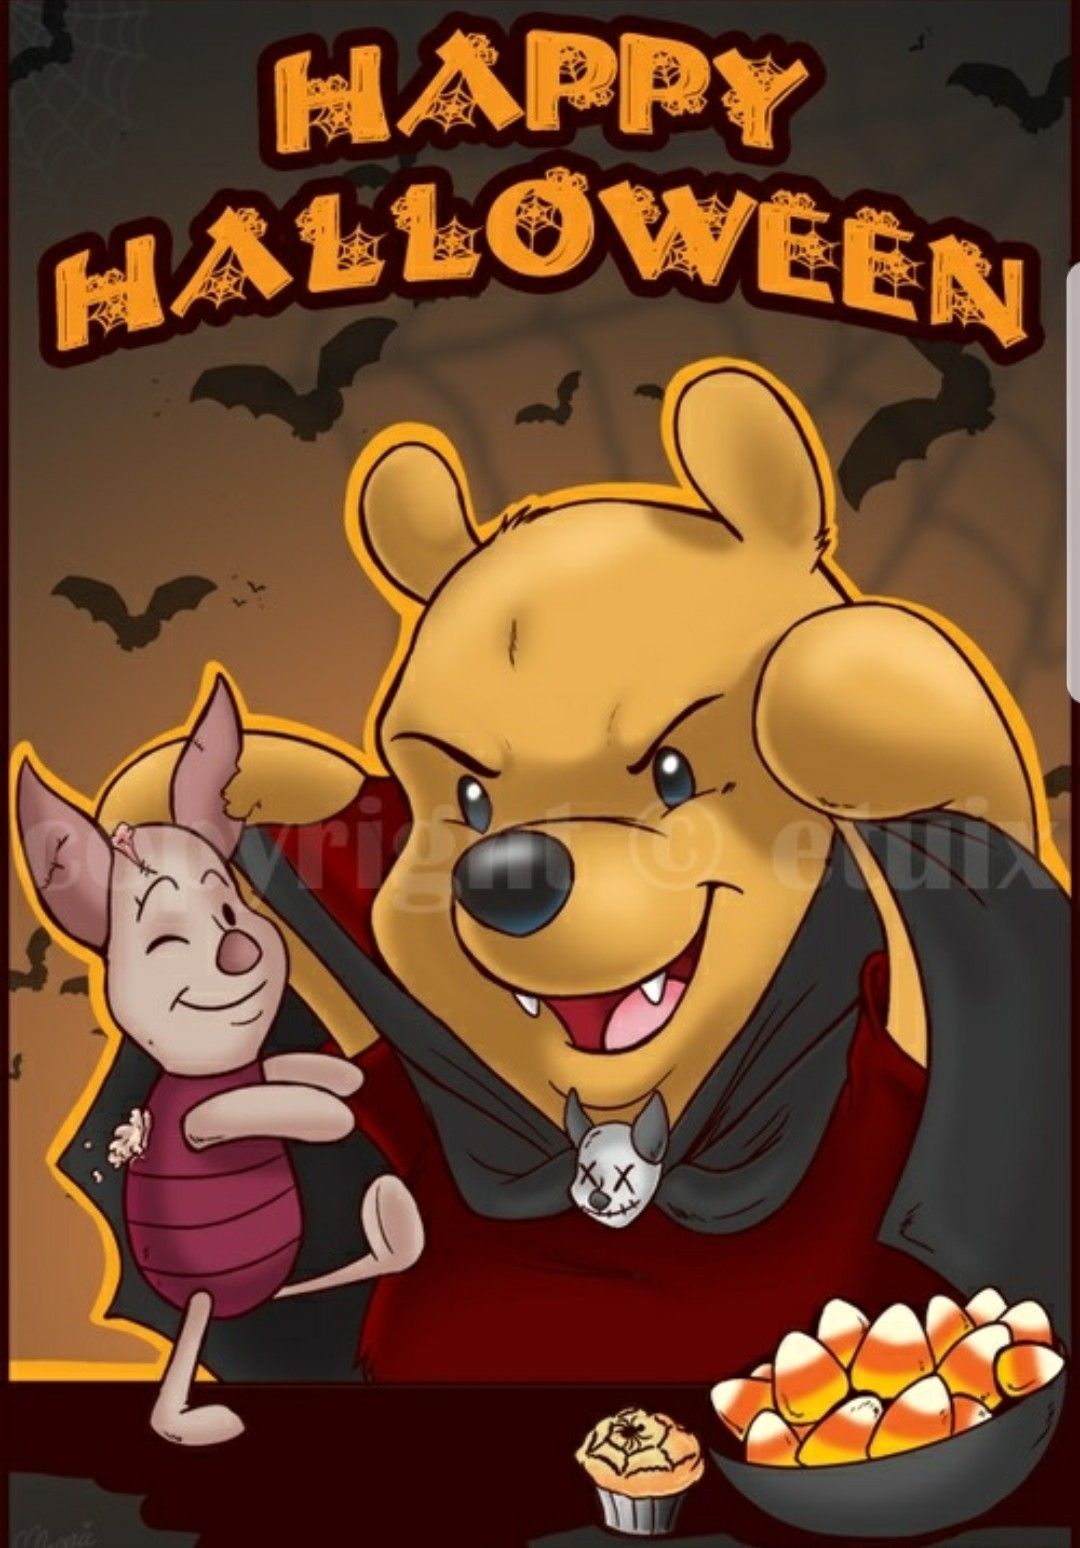 Imagenes De Halloween Png - Imagenes De Halloween Png